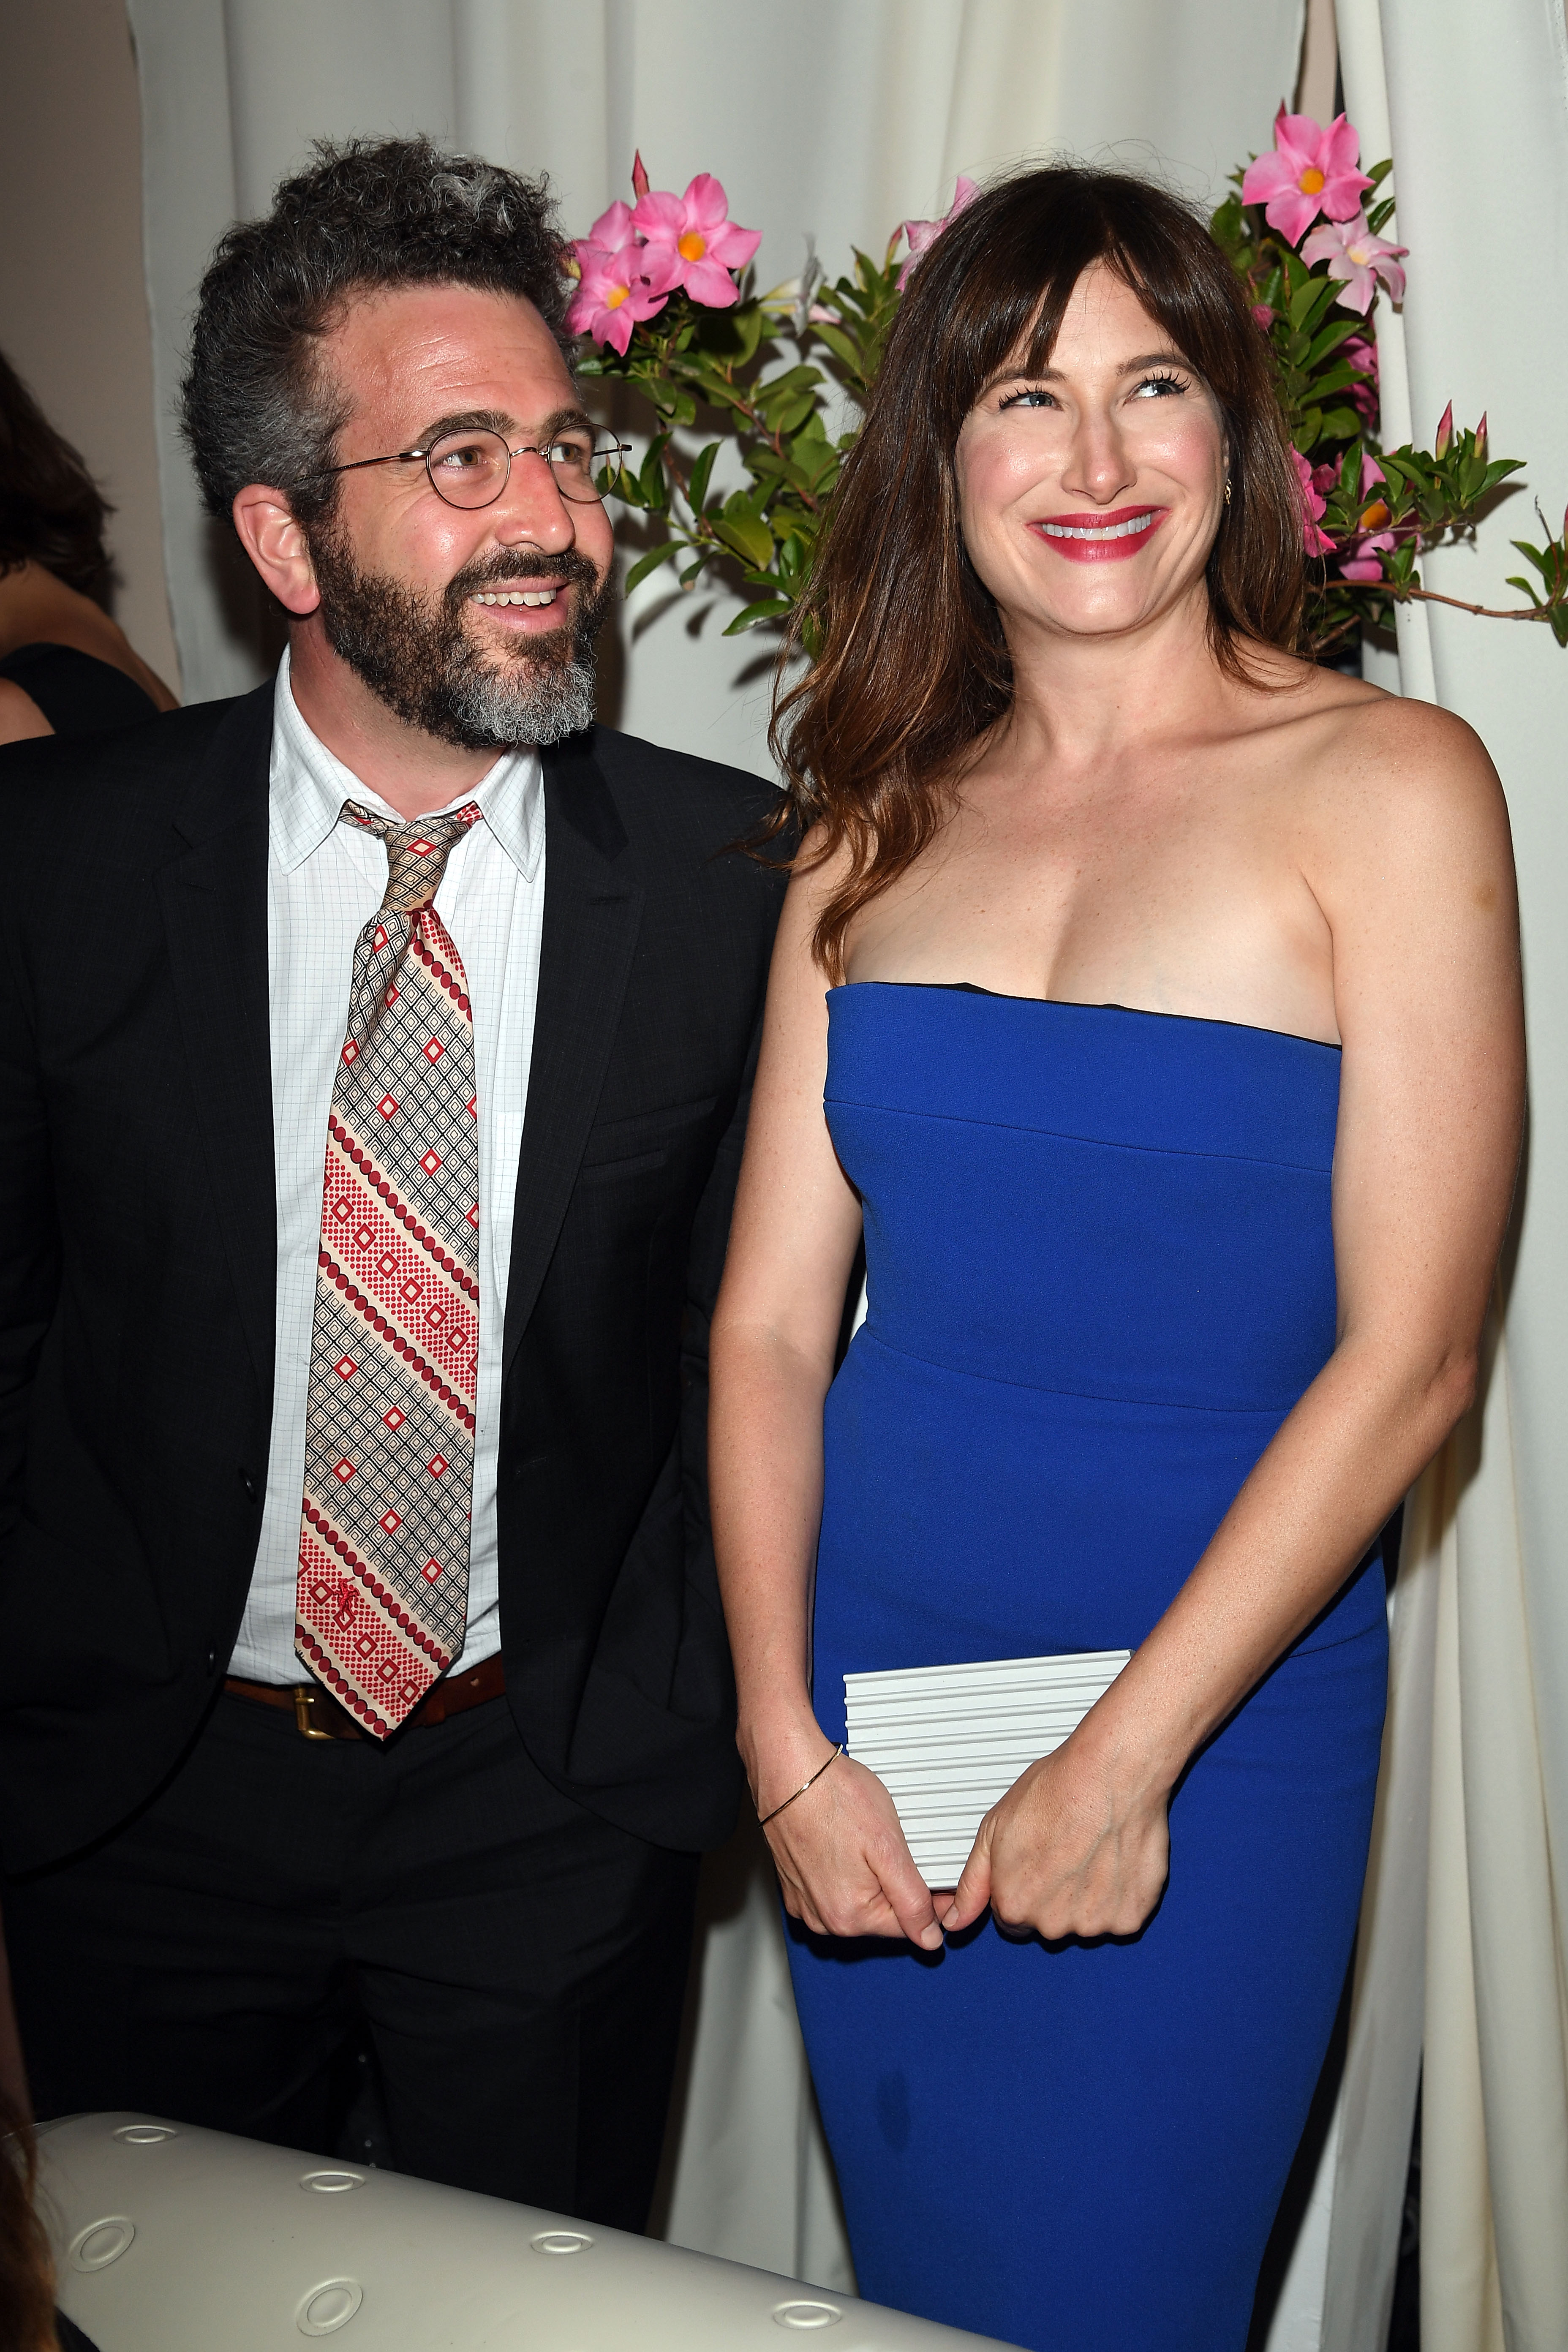 Kathryn Hahn and Ethan Sandler attend 62 Taormina Film Fest - Day 5 on June 15, 2016 in Taormina, Italy. | Source: Getty Images